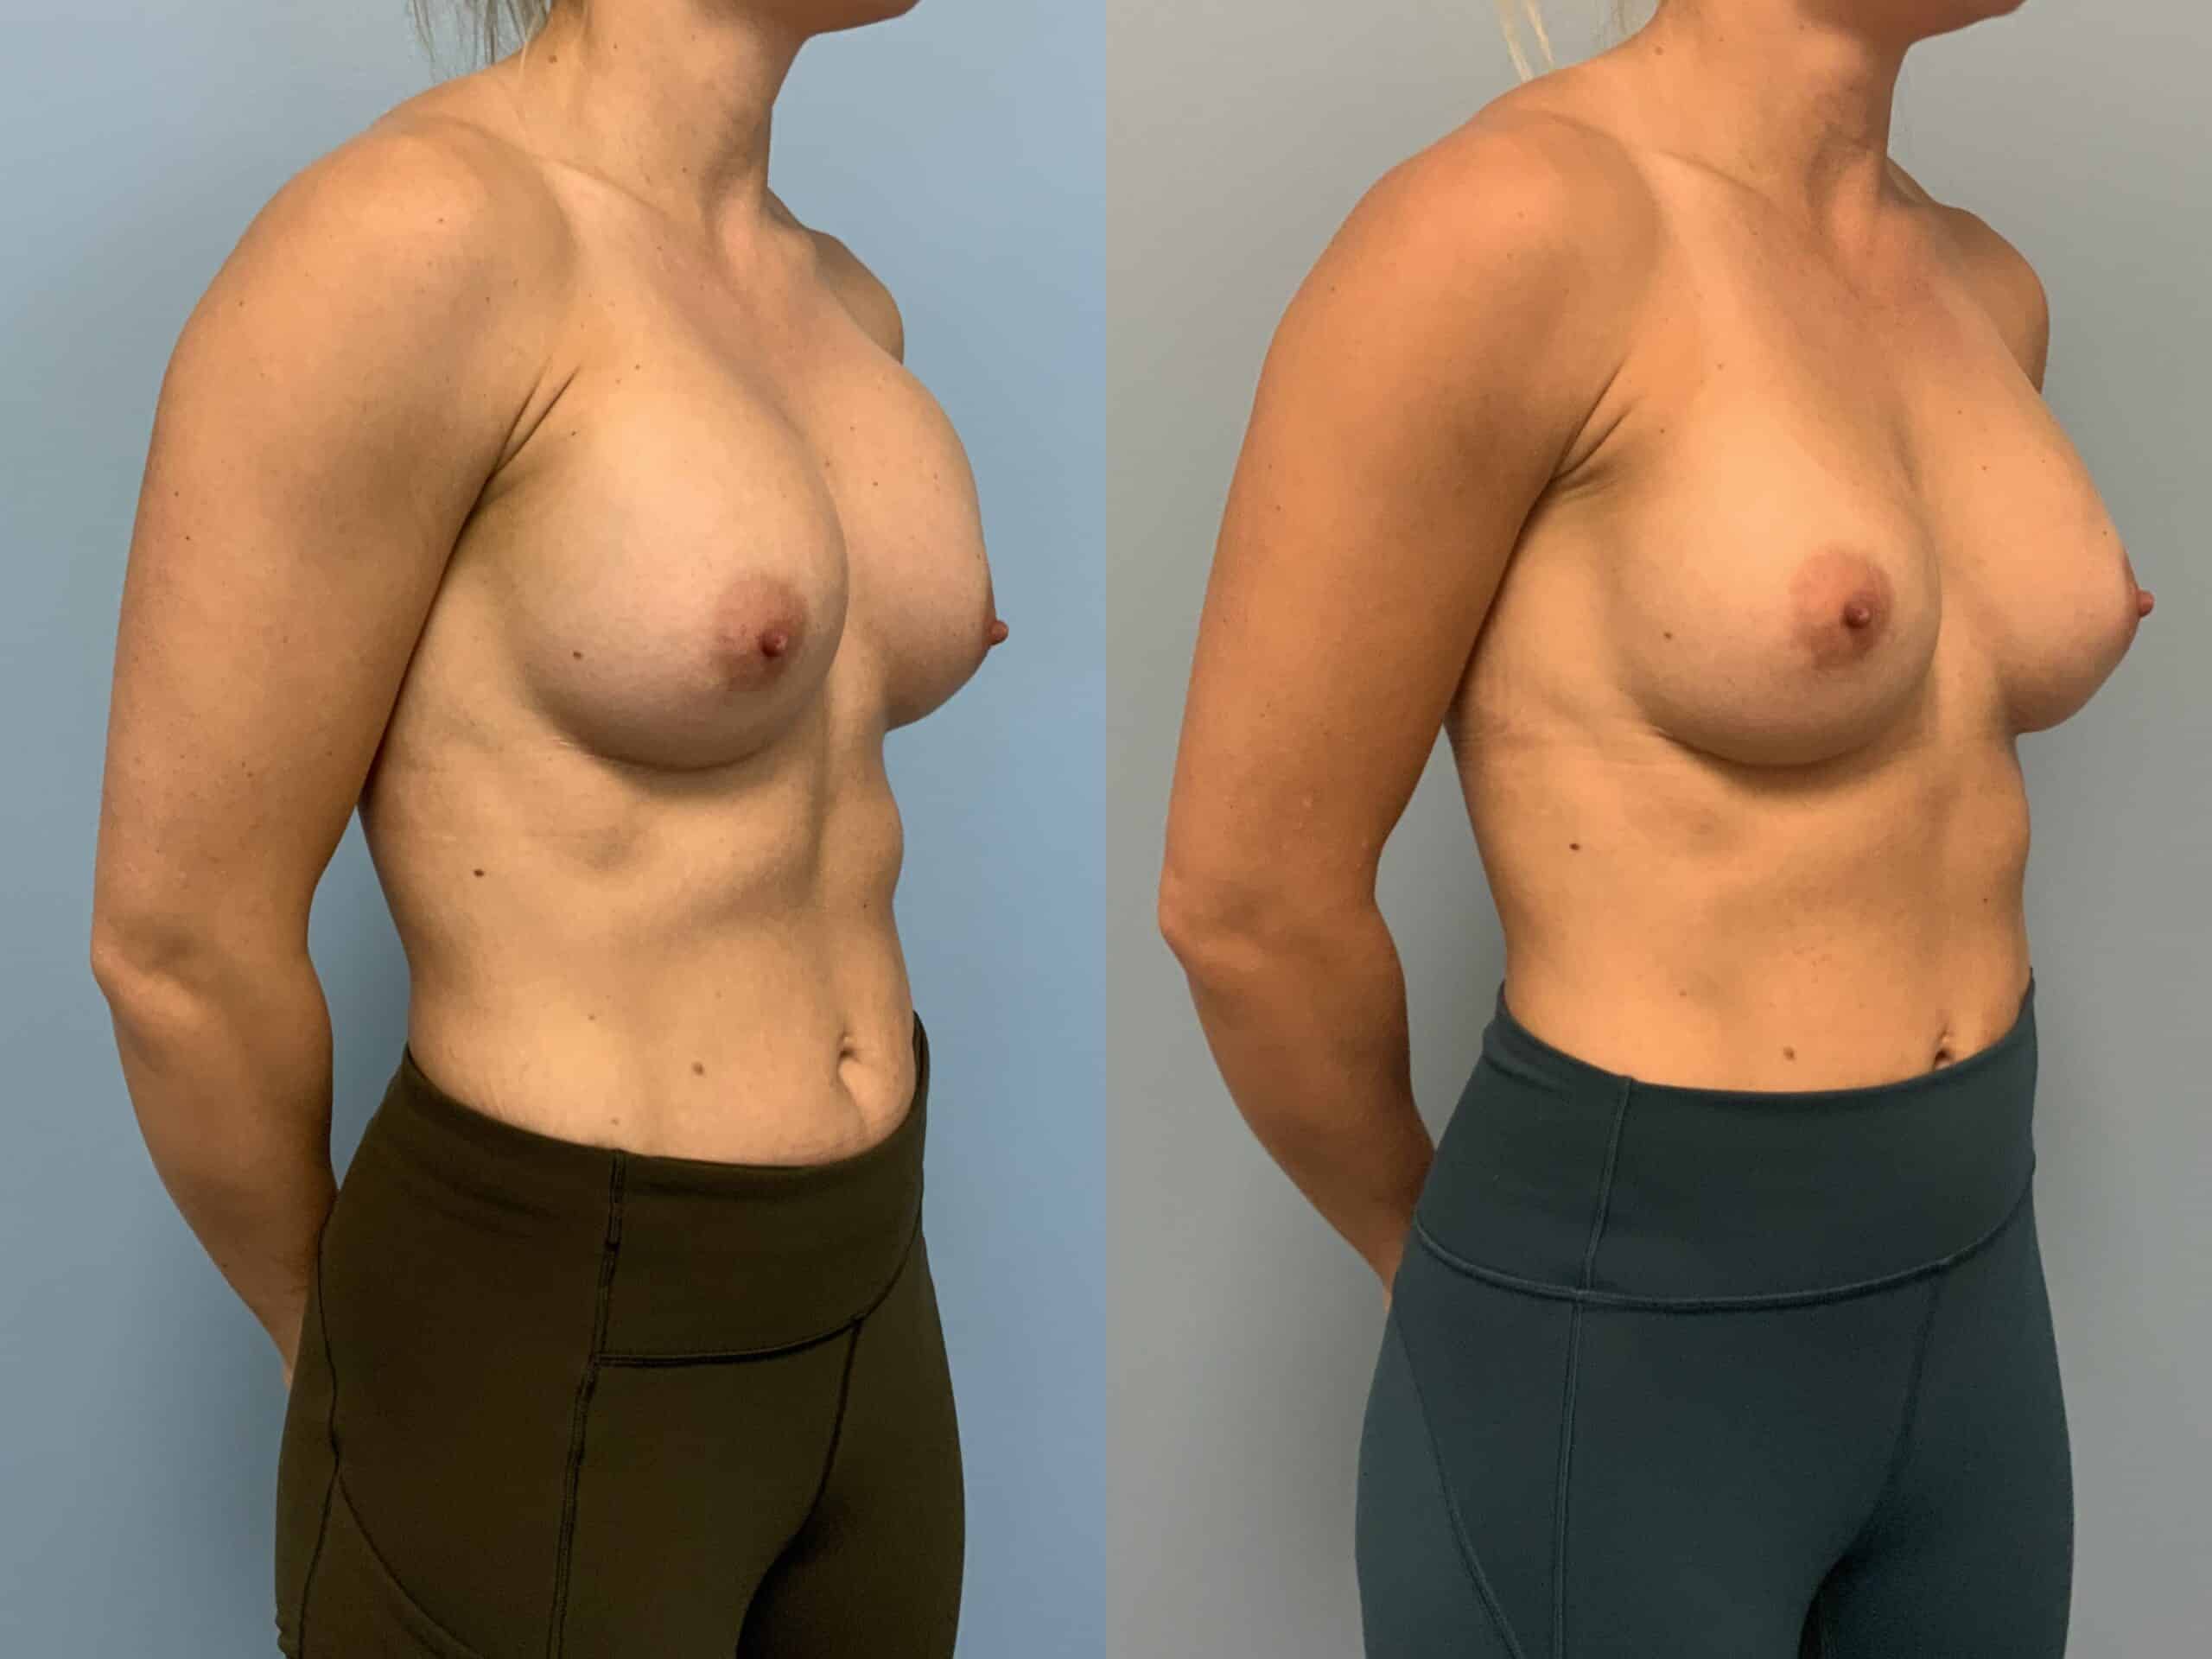 Before and after, Patient 7 mo post op from Breast Re-Augmentation, Explant of Breast Implant, Capsulectomy, Level III Muscle Release, Strattice procedures performed by Dr. Paul Vanek